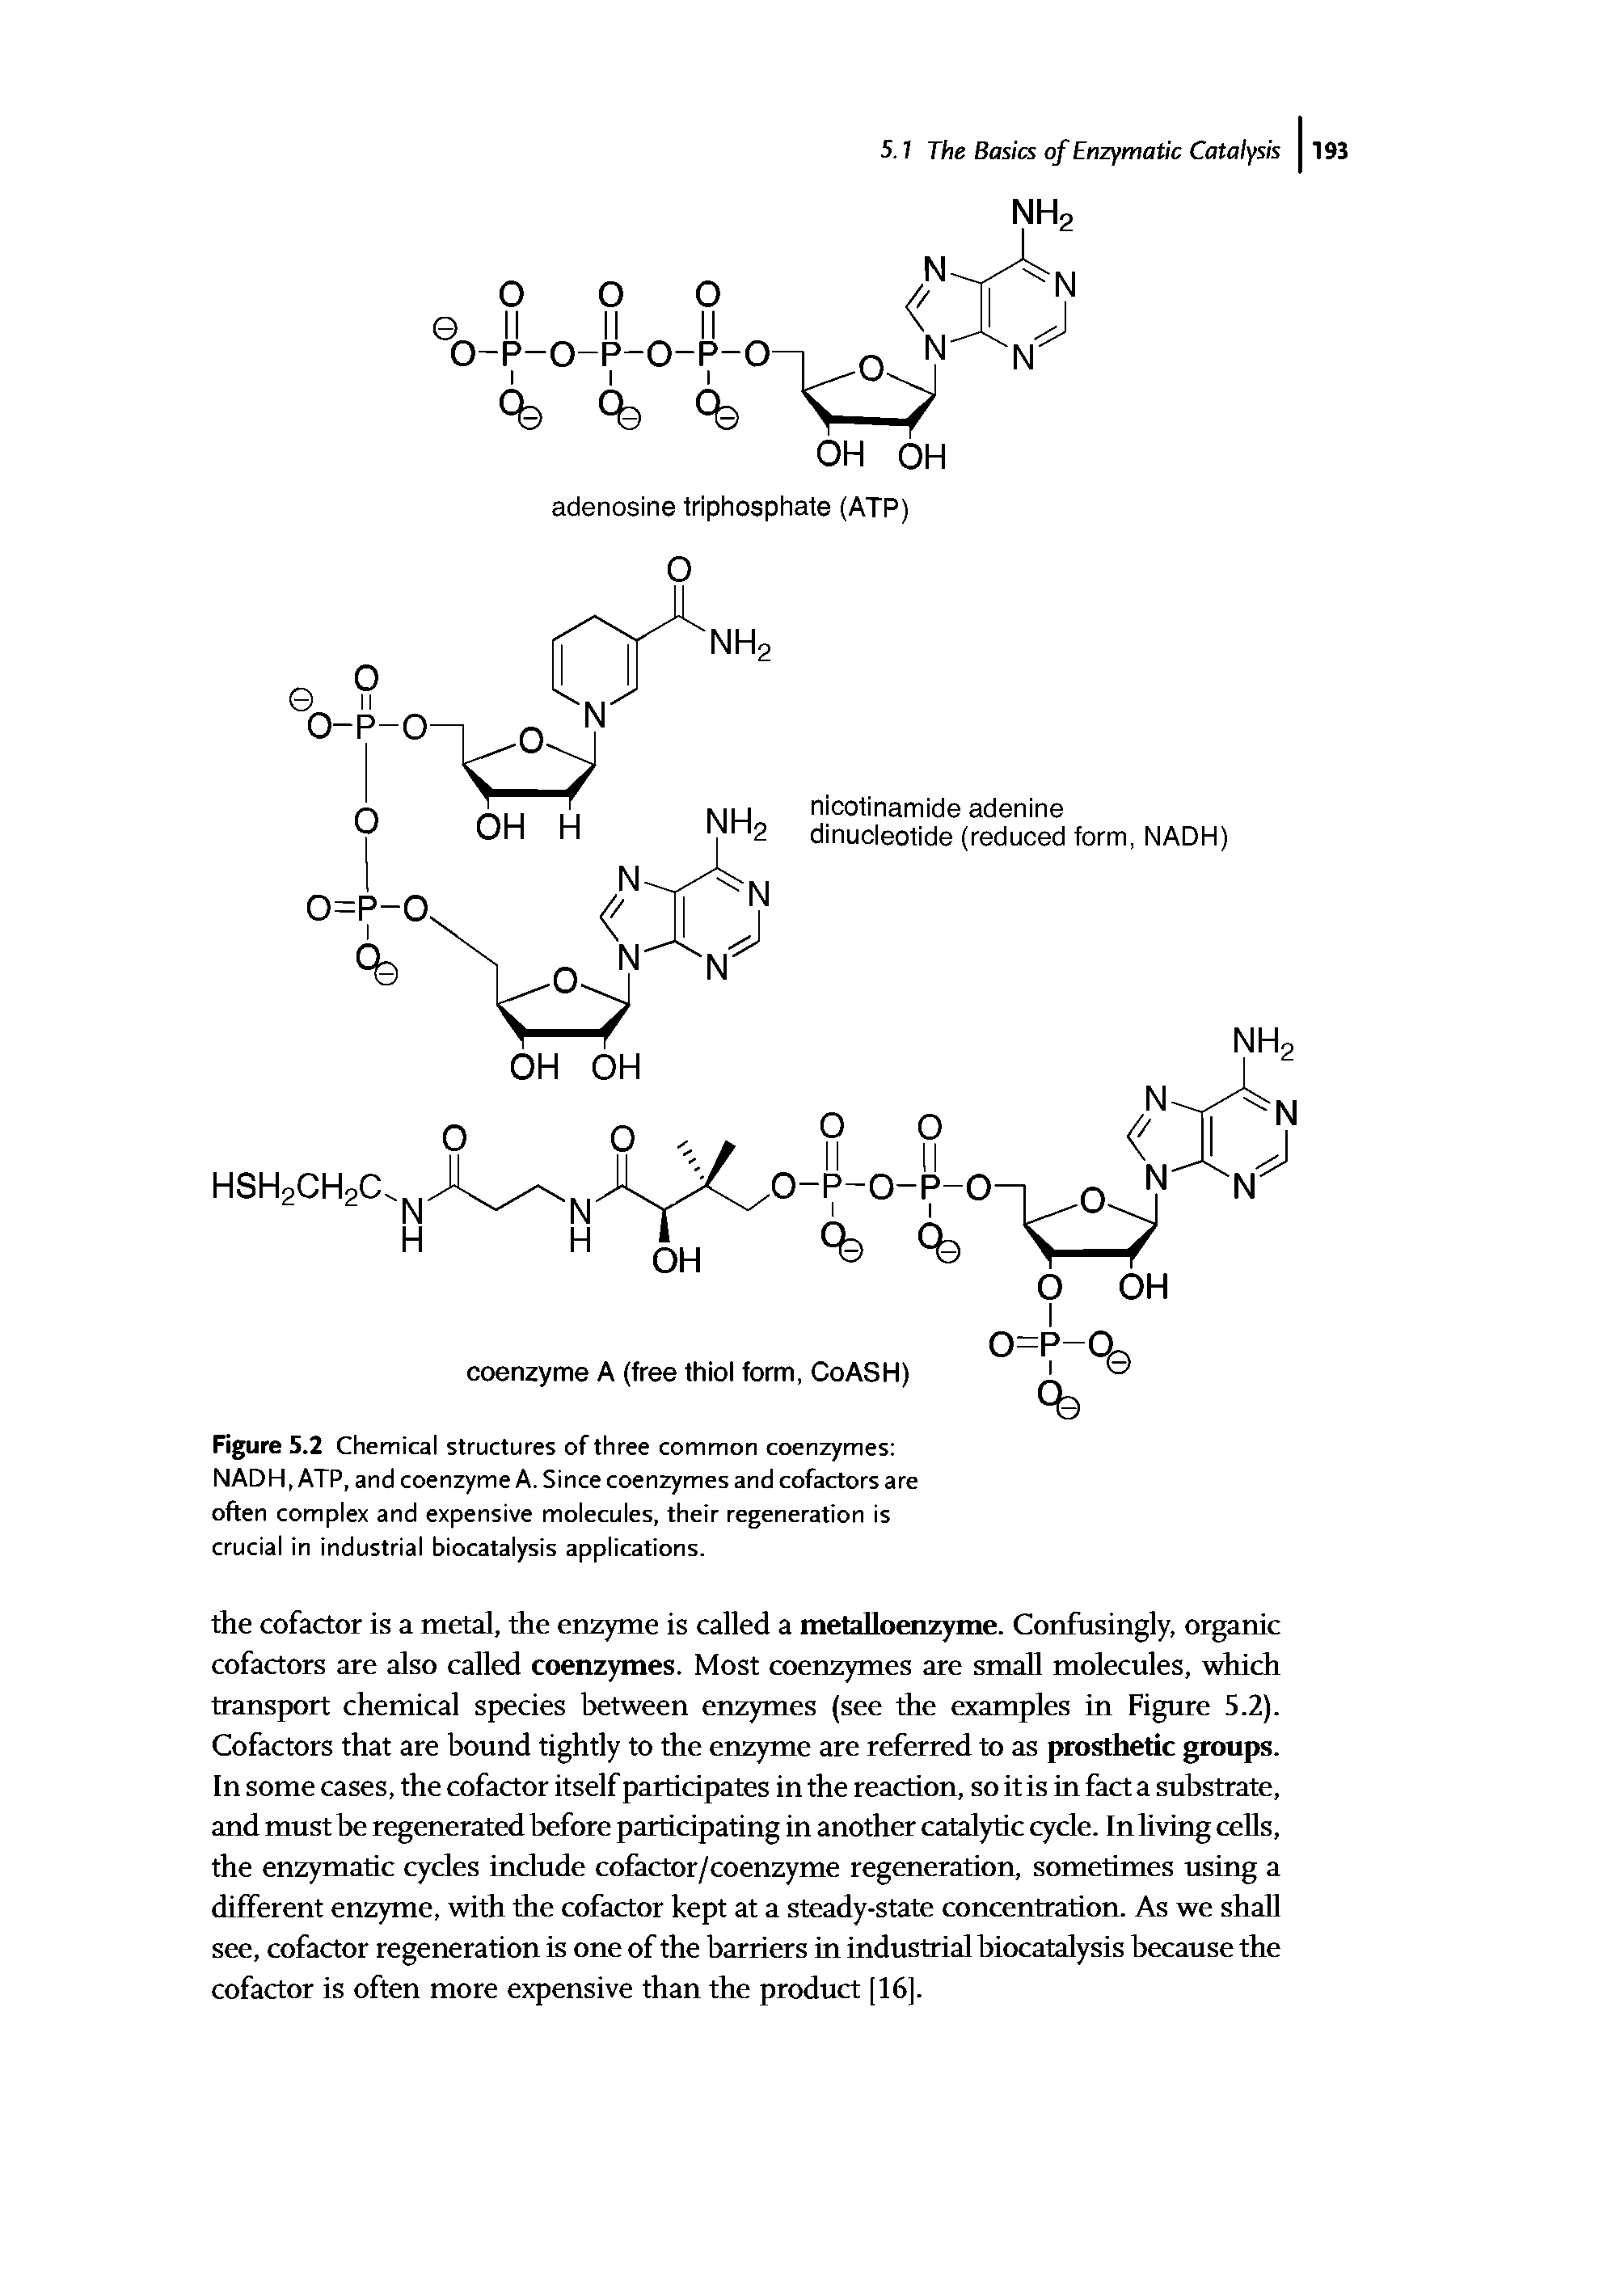 Figure 5.2 Chemical structures of three common coenzymes NADH, ATP, and coenzyme A. Since coenzymes and cofactors are often complex and expensive molecules, their regeneration is crucial in industrial biocatalysis applications.